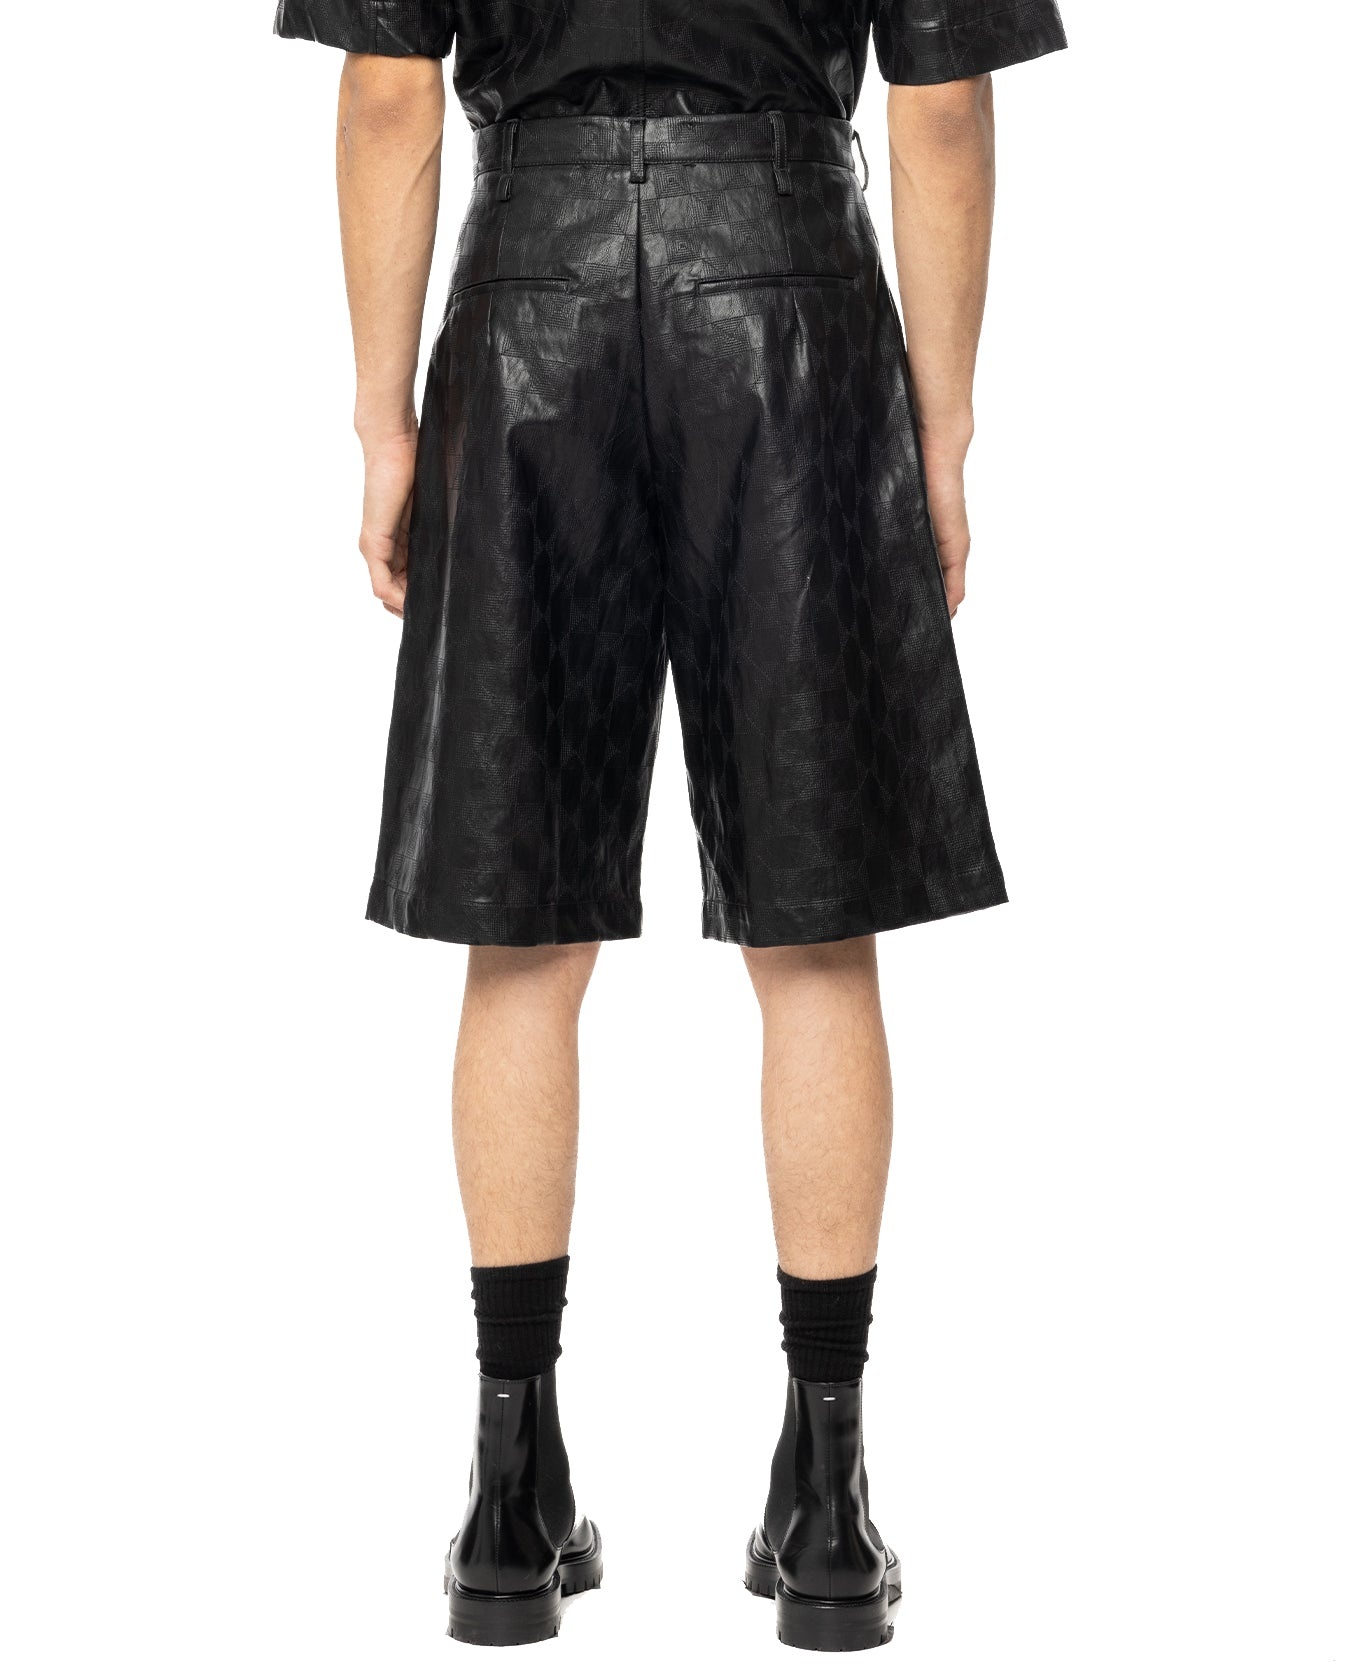 Embroidered Leather Single Pleated Shorts - Black - 4